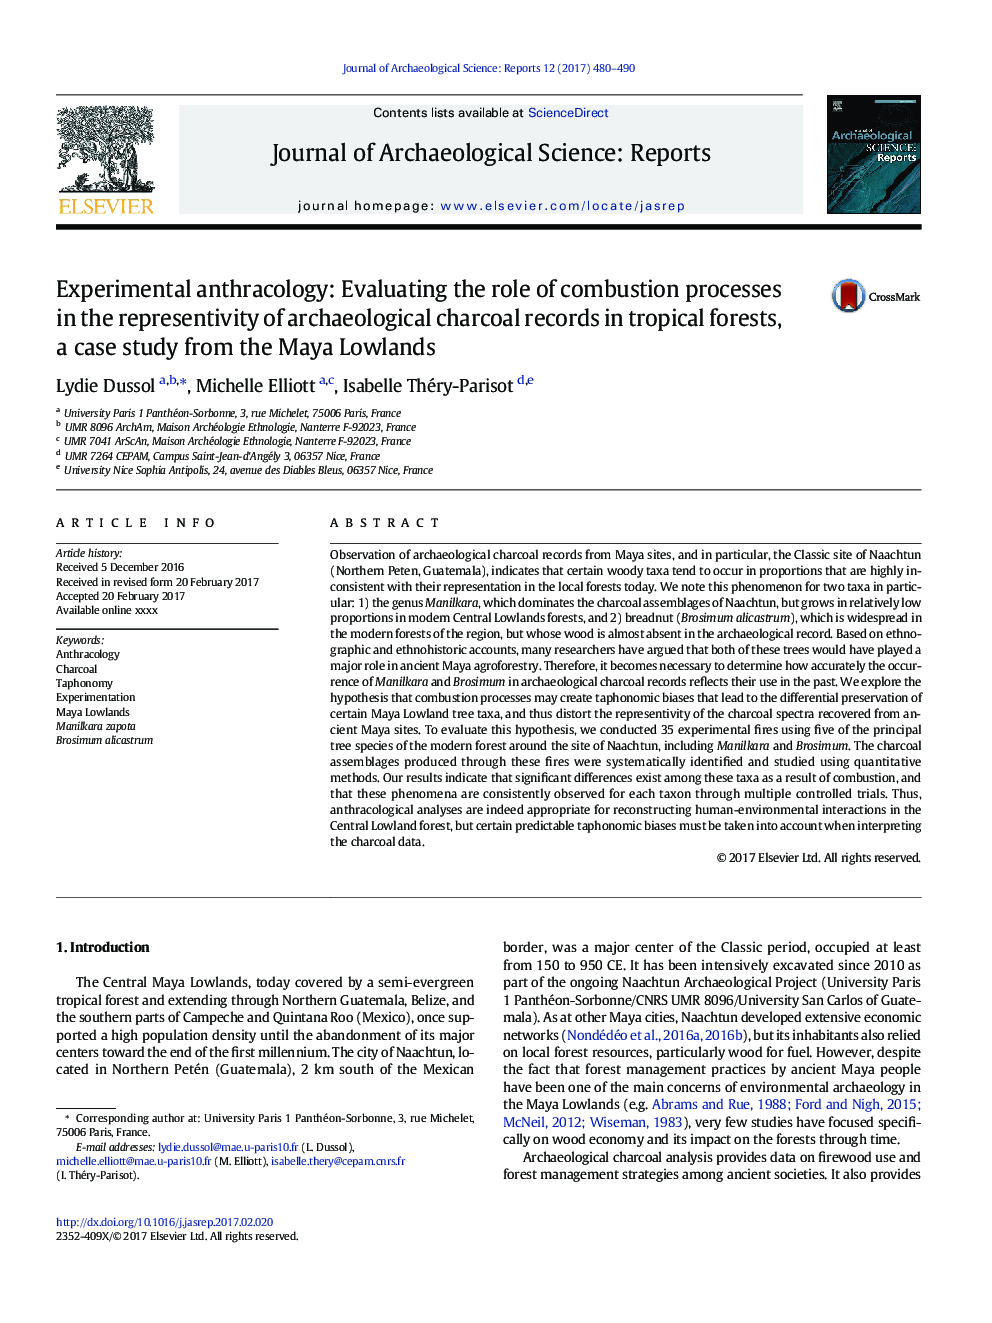 Experimental anthracology: Evaluating the role of combustion processes in the representivity of archaeological charcoal records in tropical forests, a case study from the Maya Lowlands